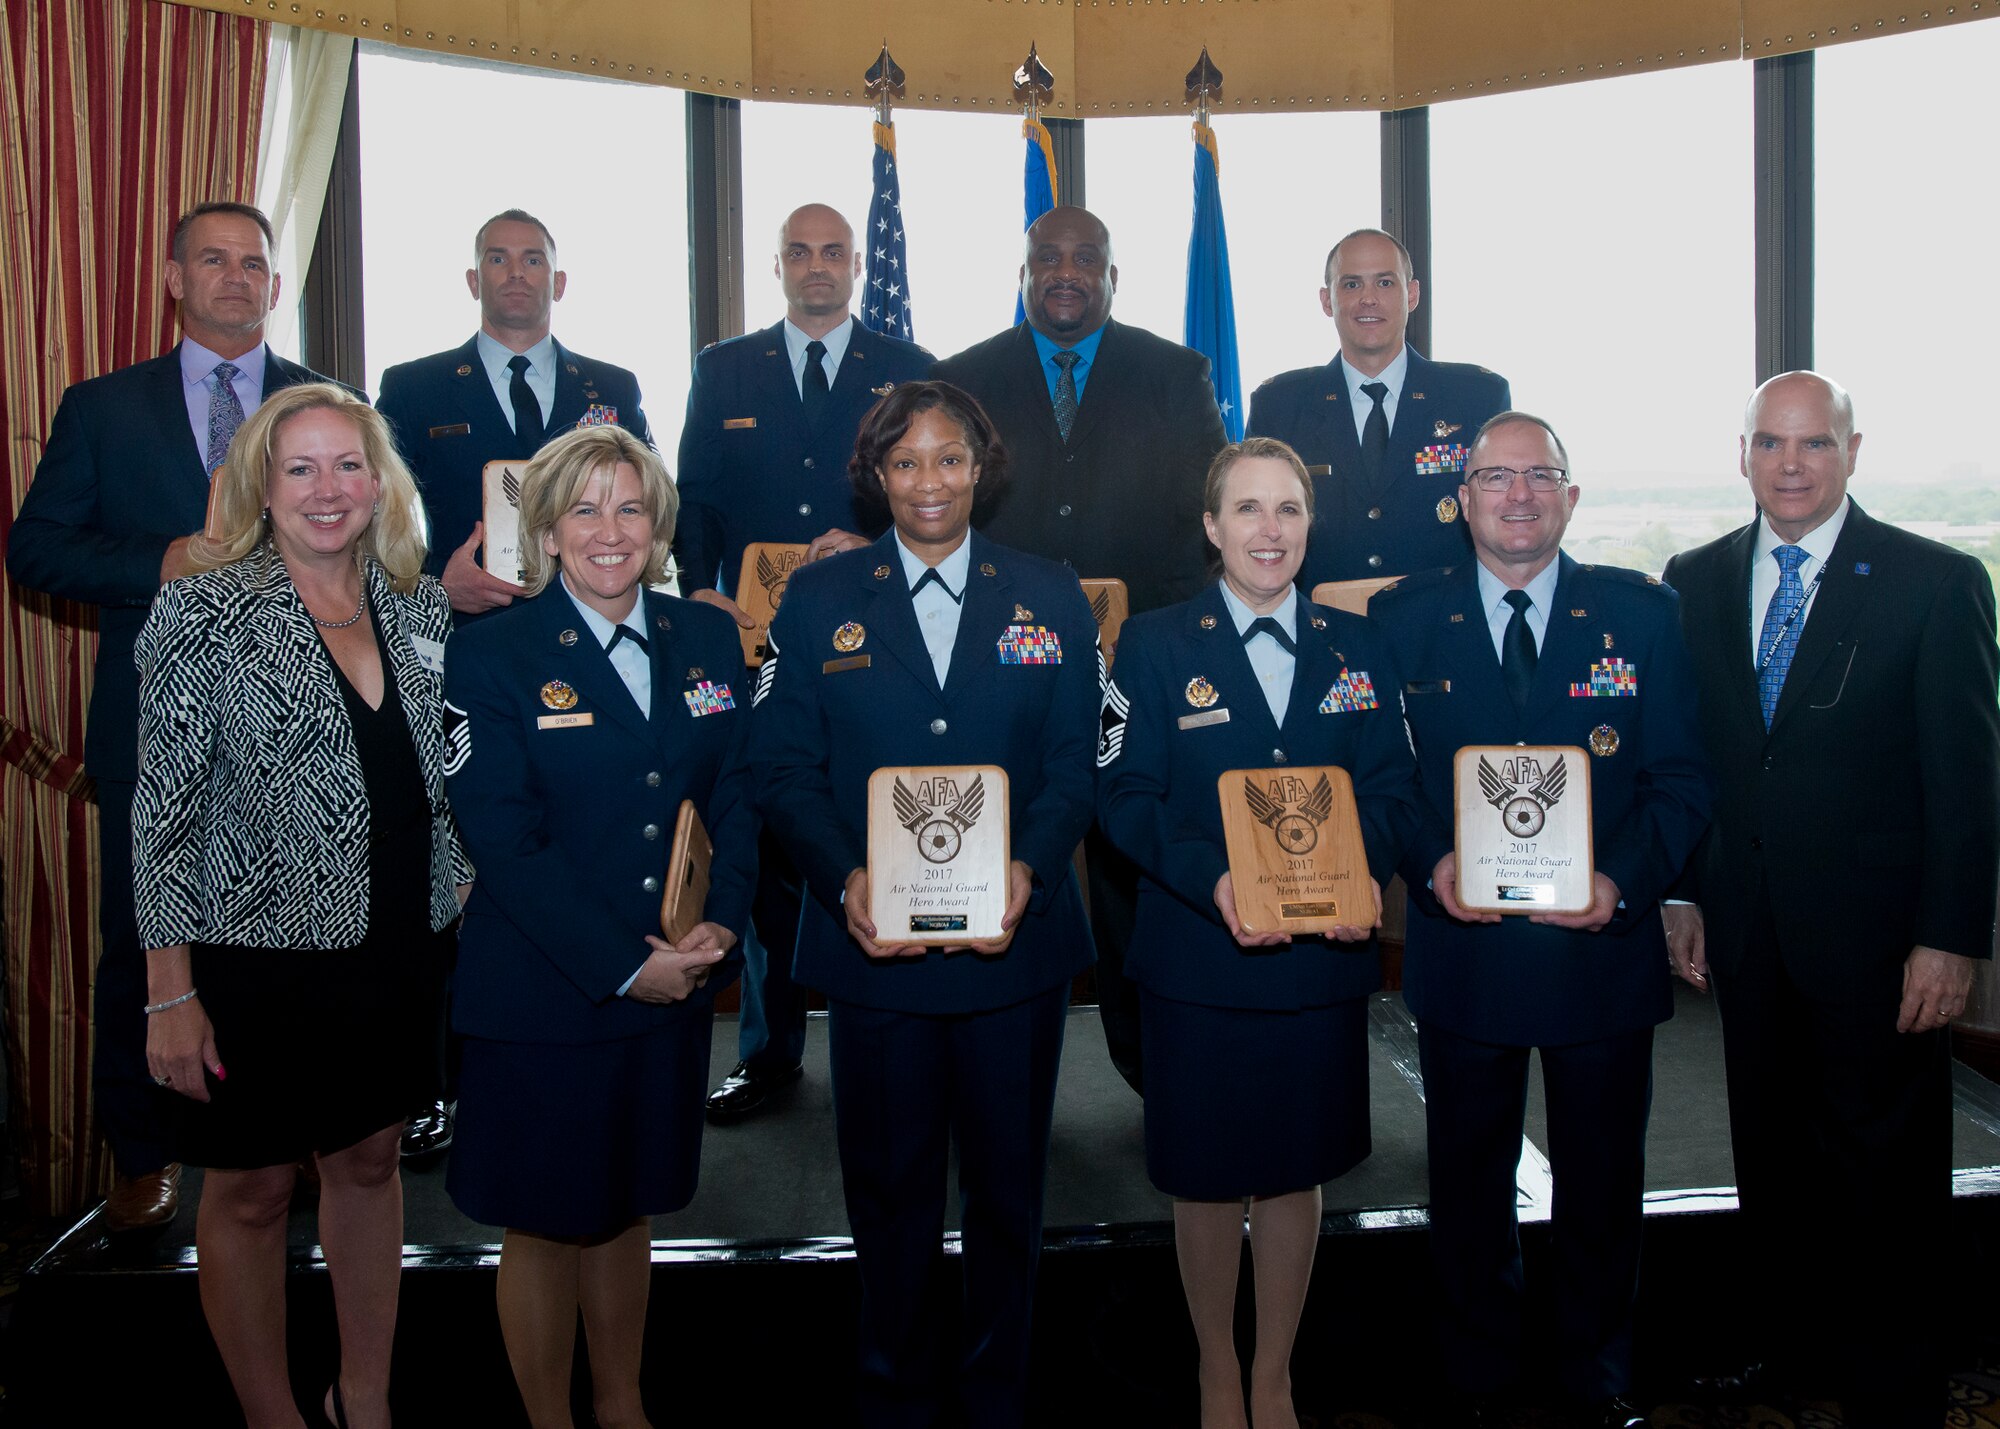 Air National Guard leadership and honorees pose at the 15th annual Air Force Association's Salute to the Air National Gaurd, held April 19, 2017, in Crystal City, Virginia. The AFA's D.W. Steele Sr. Memorial Chapter honored 12 ANG members across a broad range of specialties for their dedication and outstanding contributions to the success of the ANG and the overall Air Force mission. (U.S. Air National Guard photo by Staff Sgt. John E. Hillier)